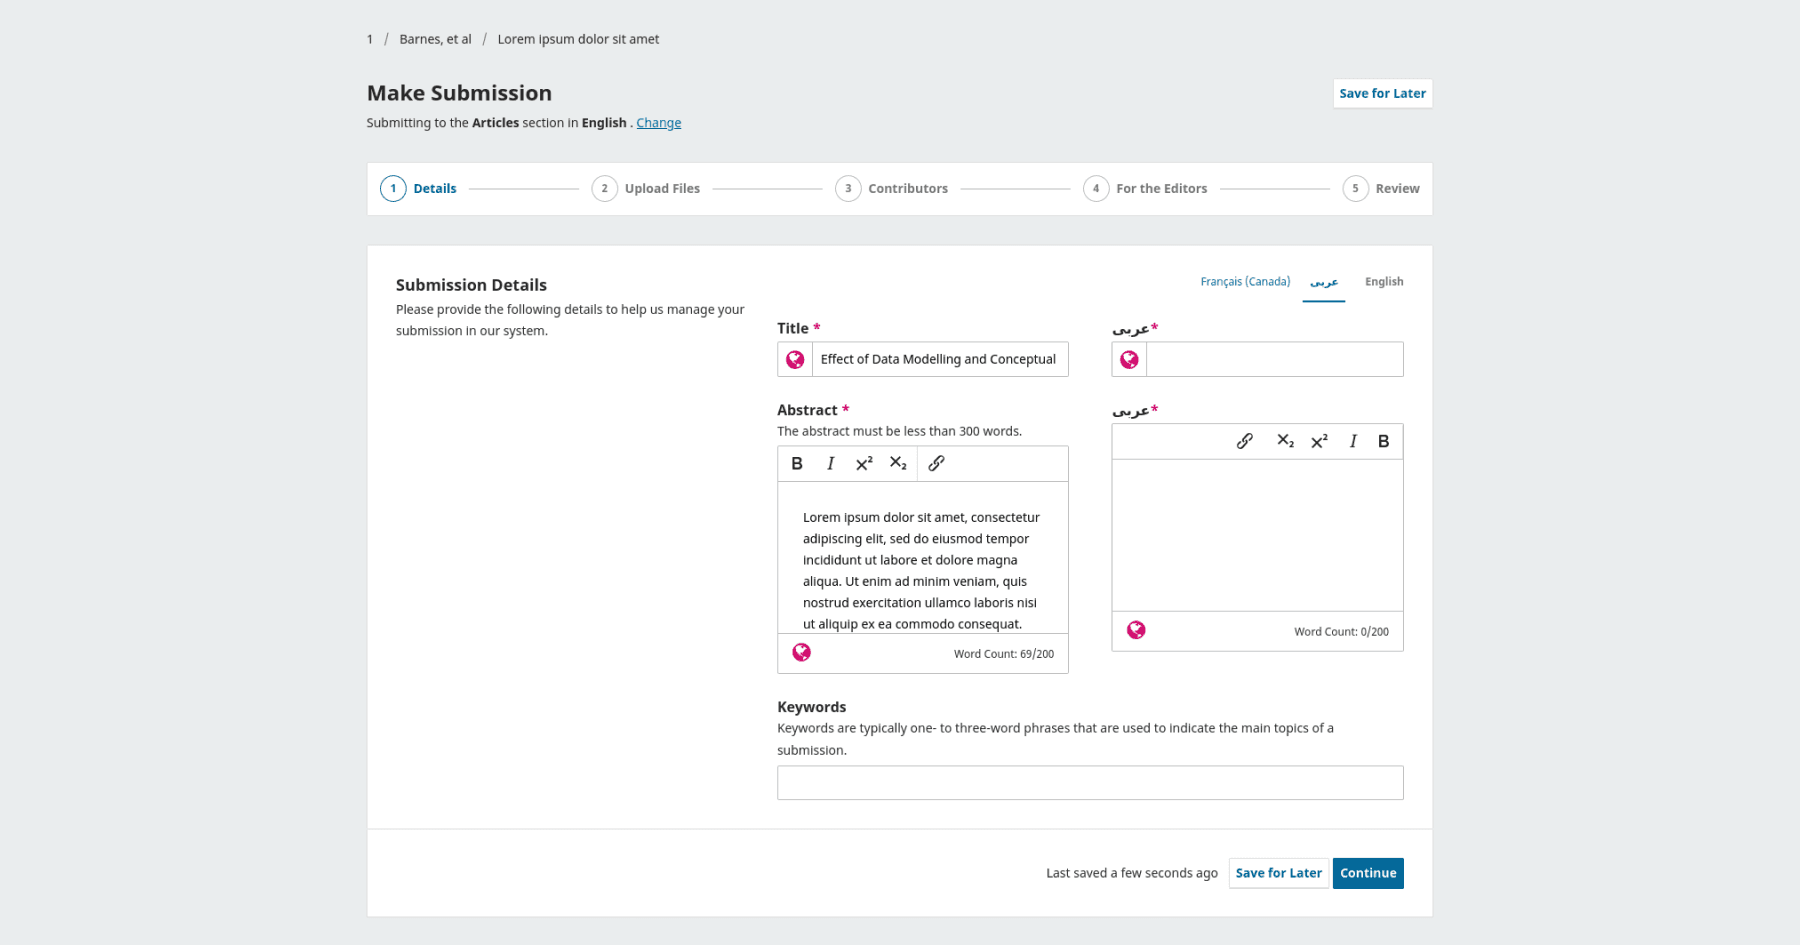 Screenshot of the step-by-step workflow to make a new journal submission